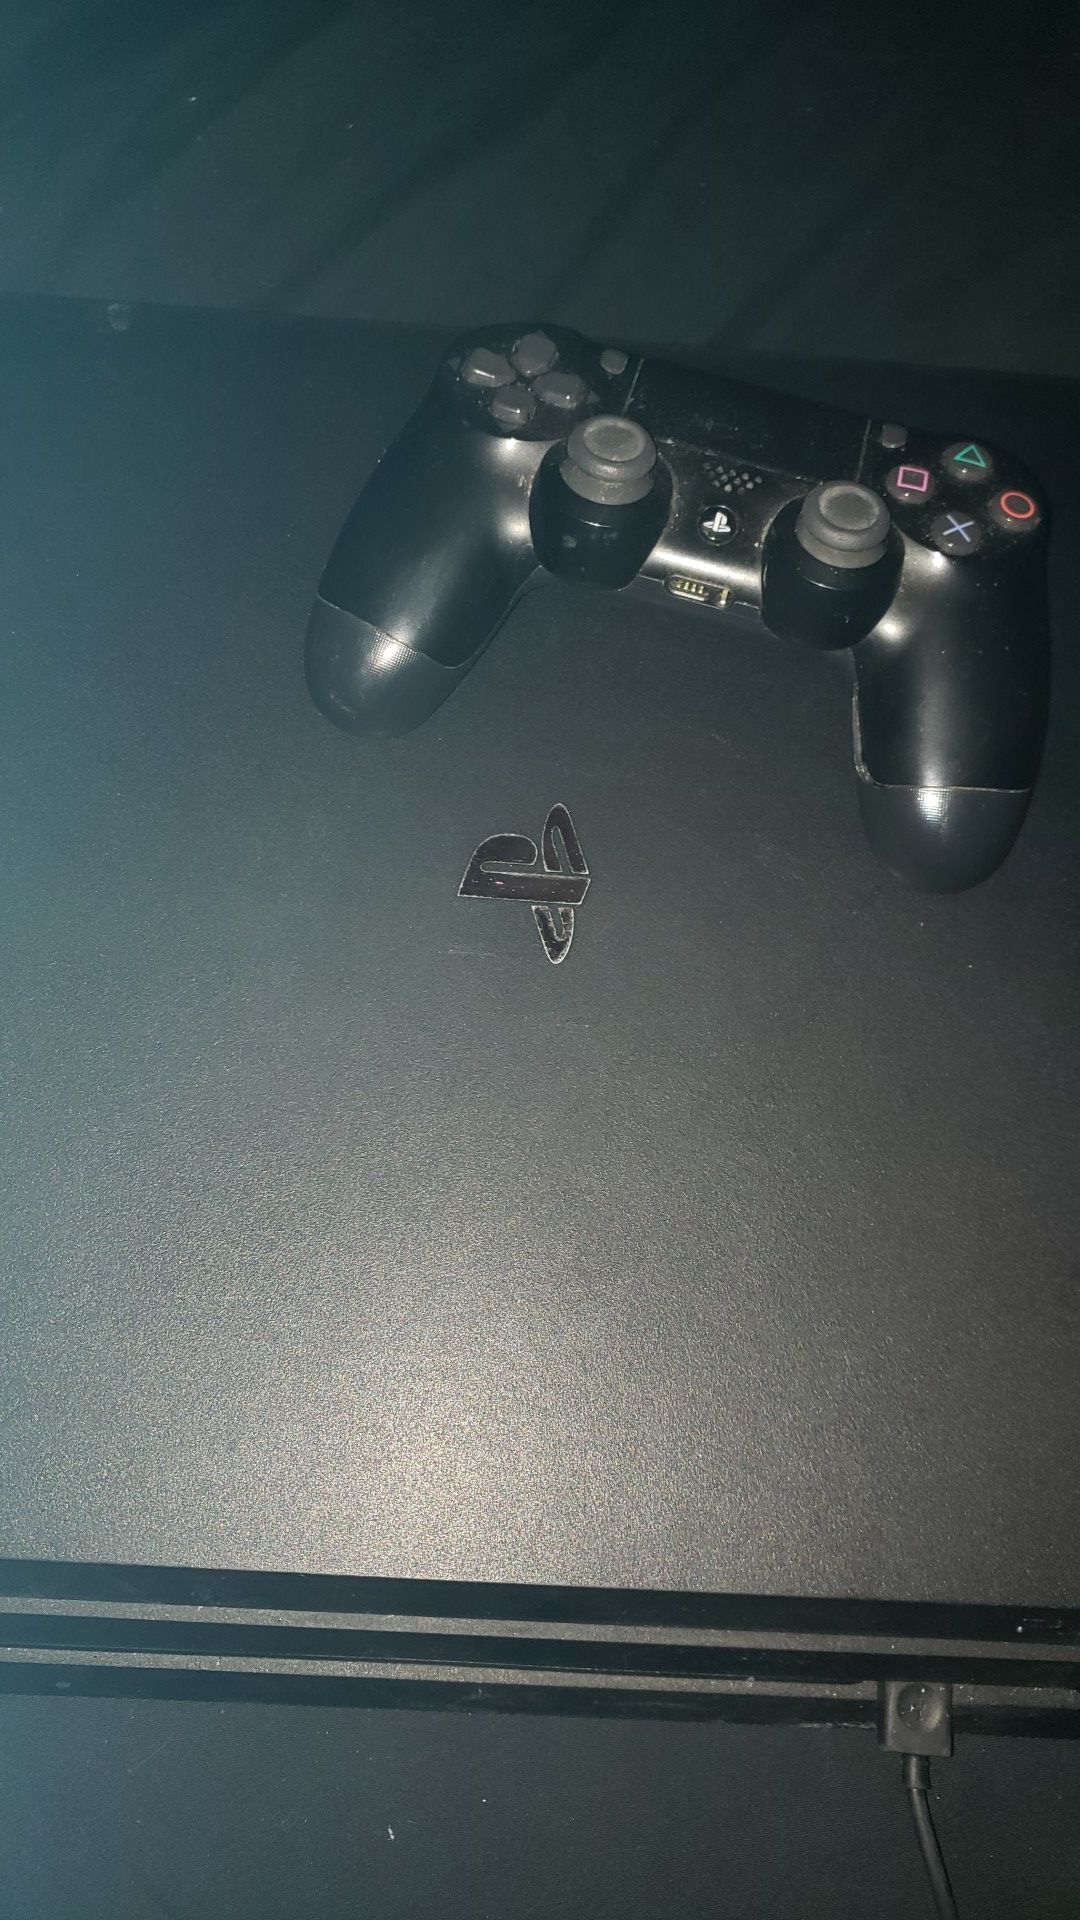 Ps4 Pro 1 TB with controller